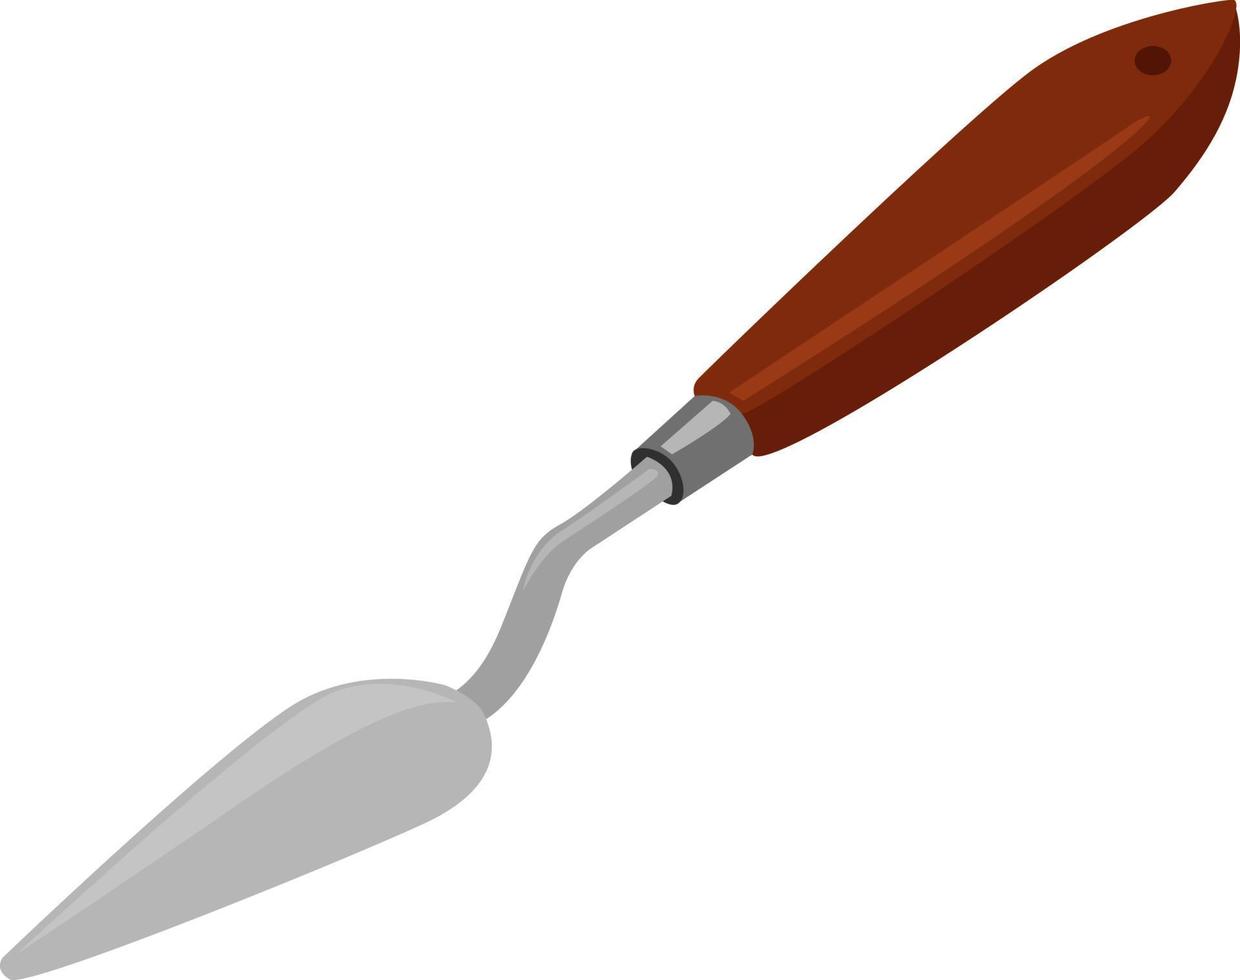 Small painting knife, illustration, vector on a white background.